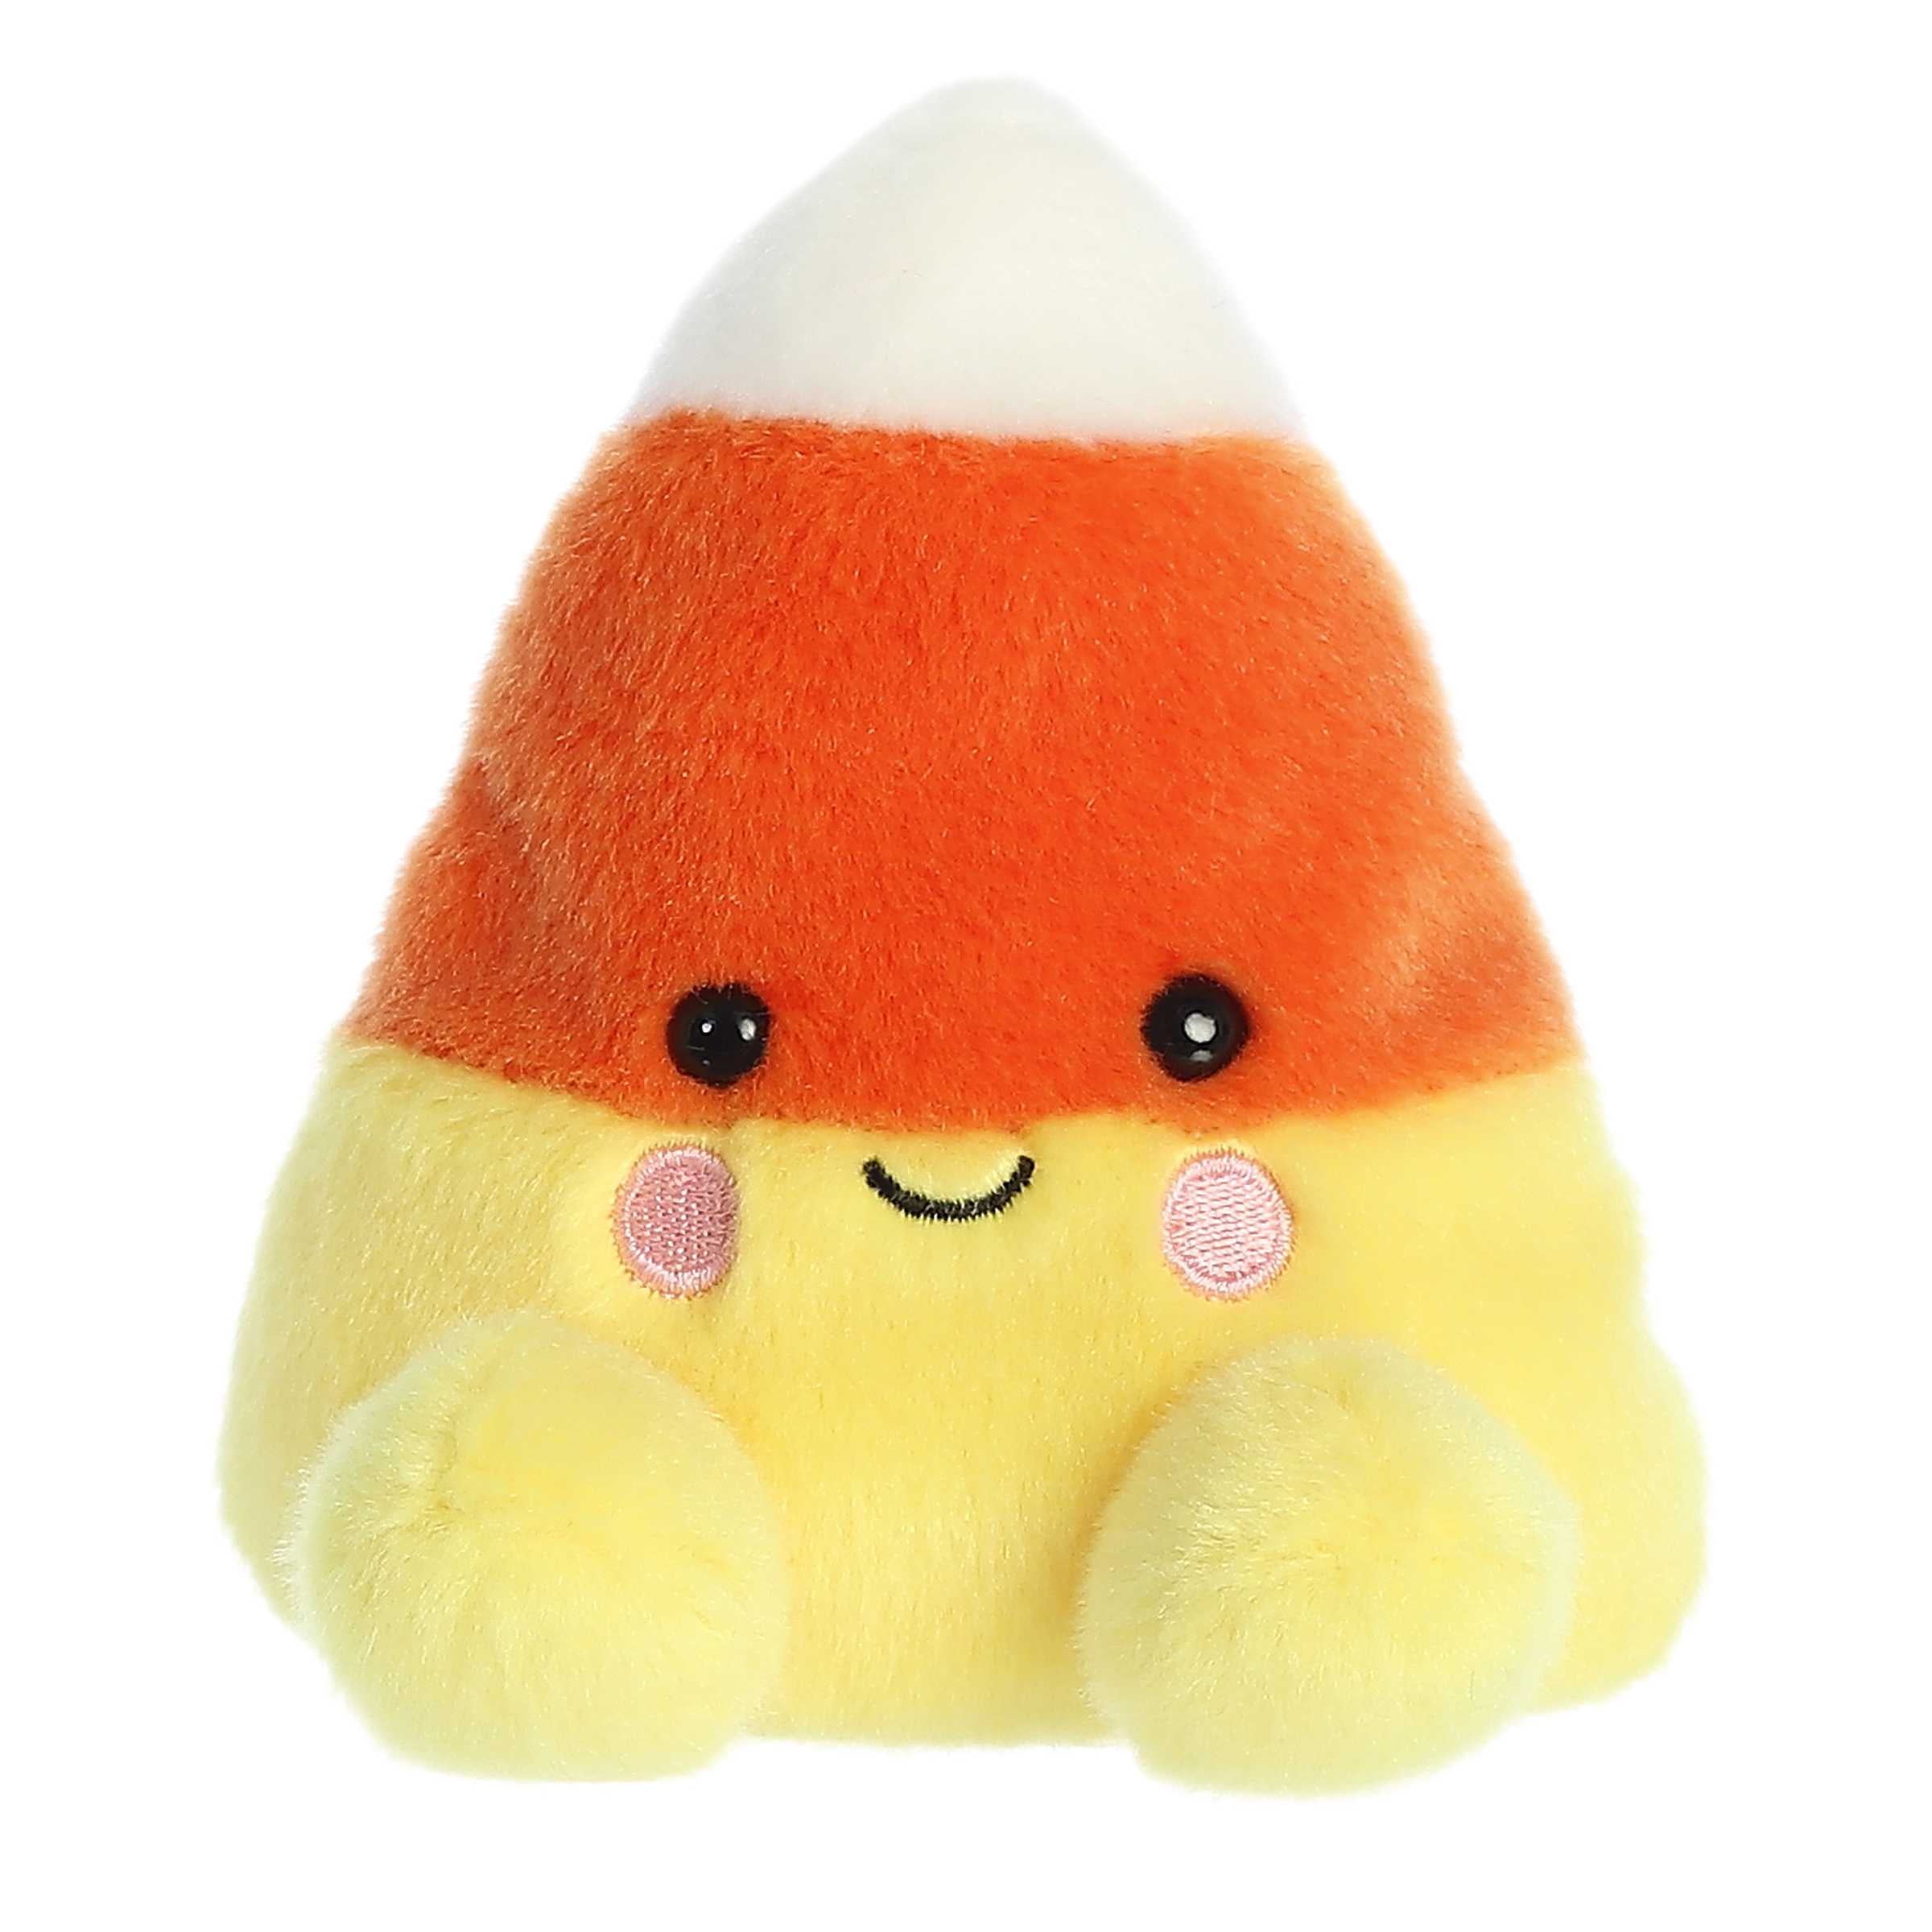 Adorable plushie candy corn treat sitting with a cute smile and blushing pink cheeks